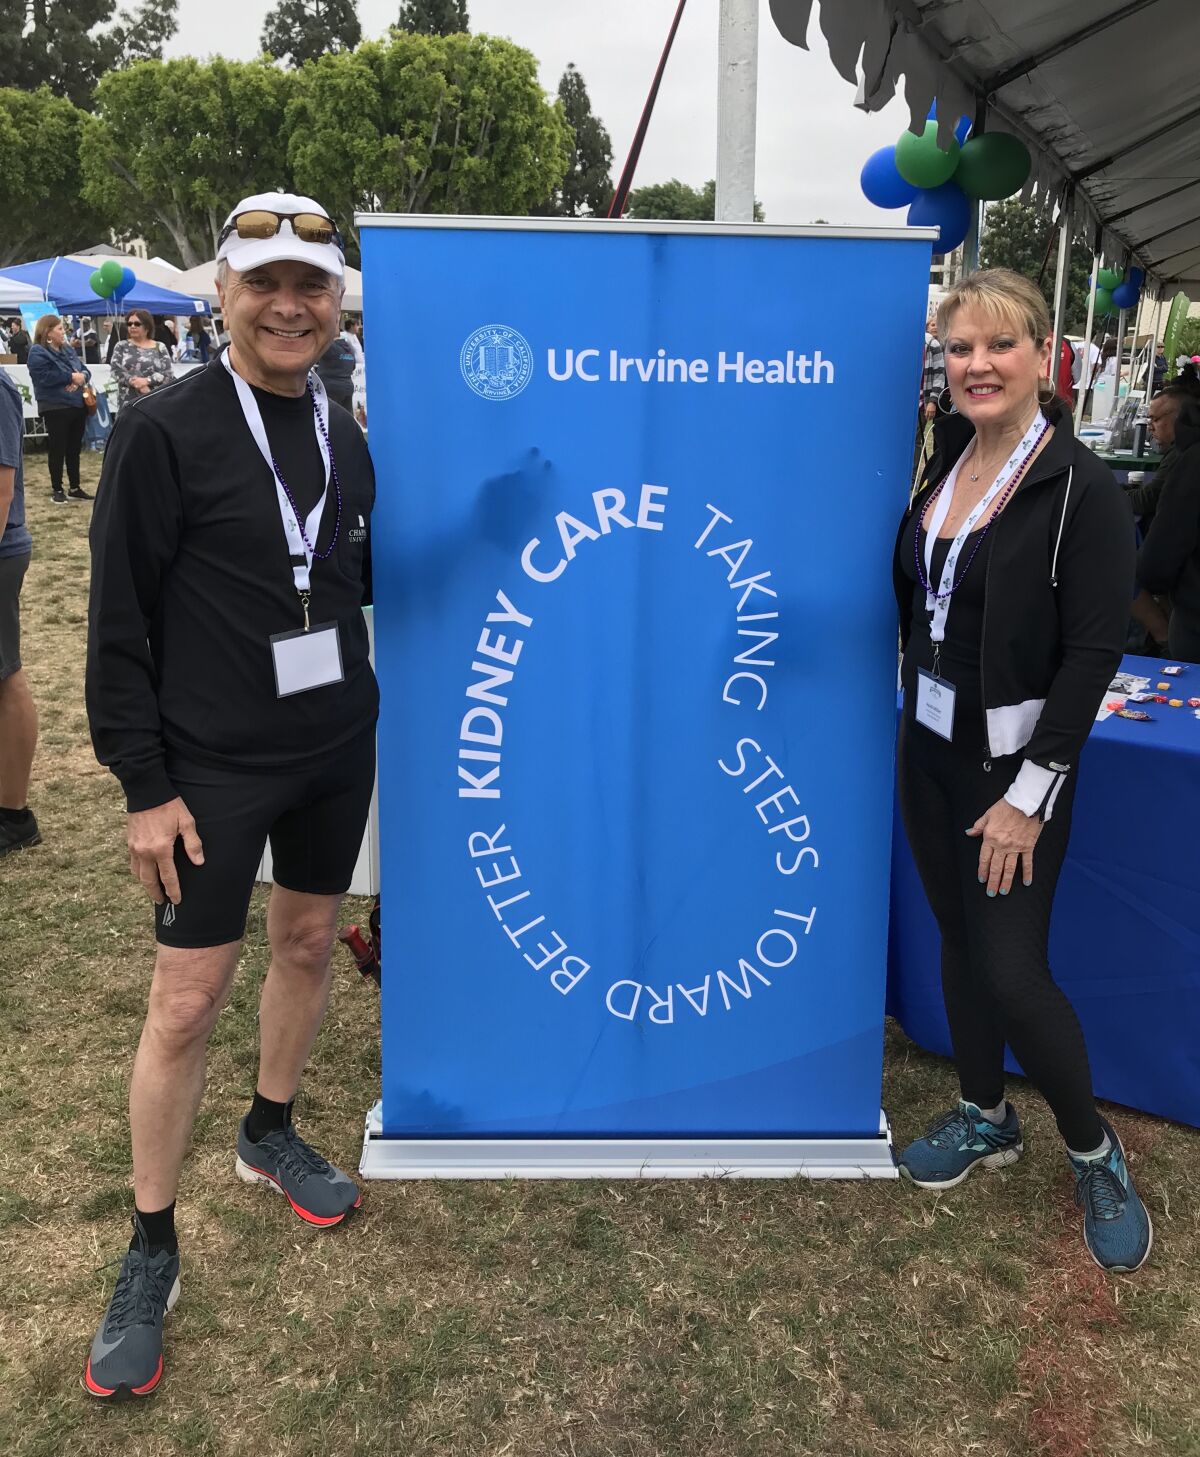 Dr. Jim Doti and Dr. Heidi Miller at a kidney care event at UC Irvine Health.